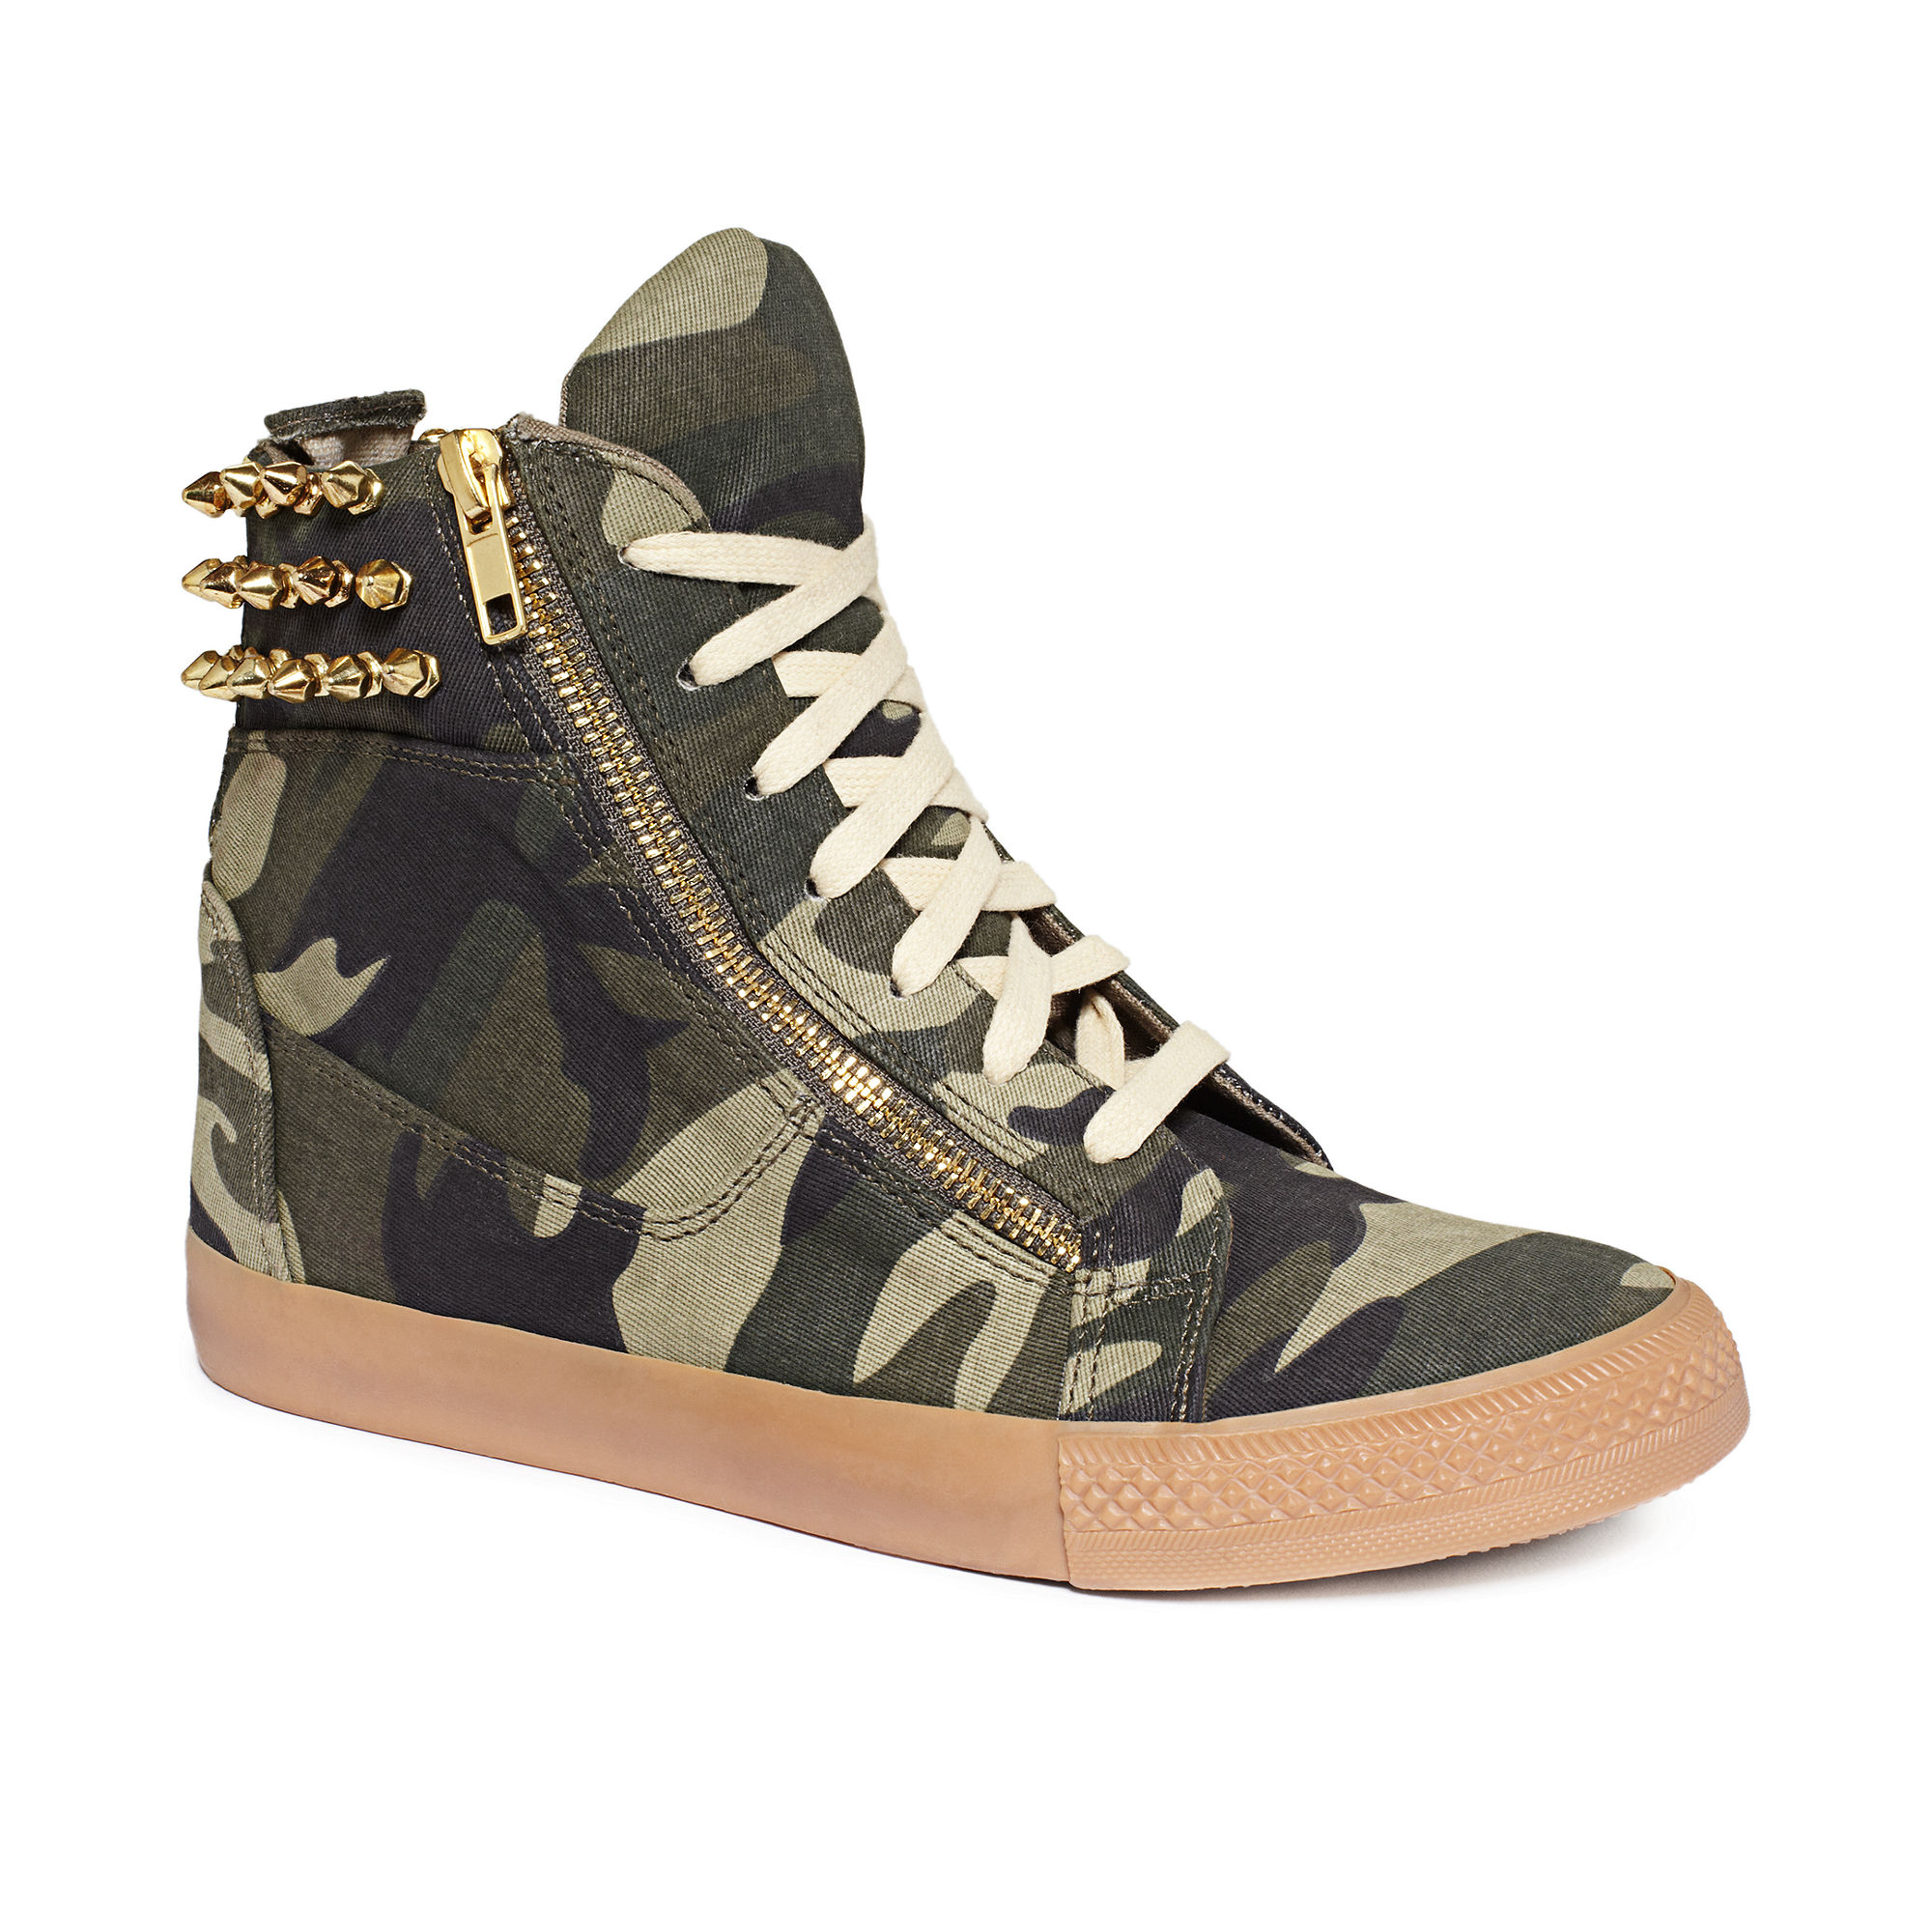 Betsey johnson Nxtstep High Top Sneakers in Green | Lyst